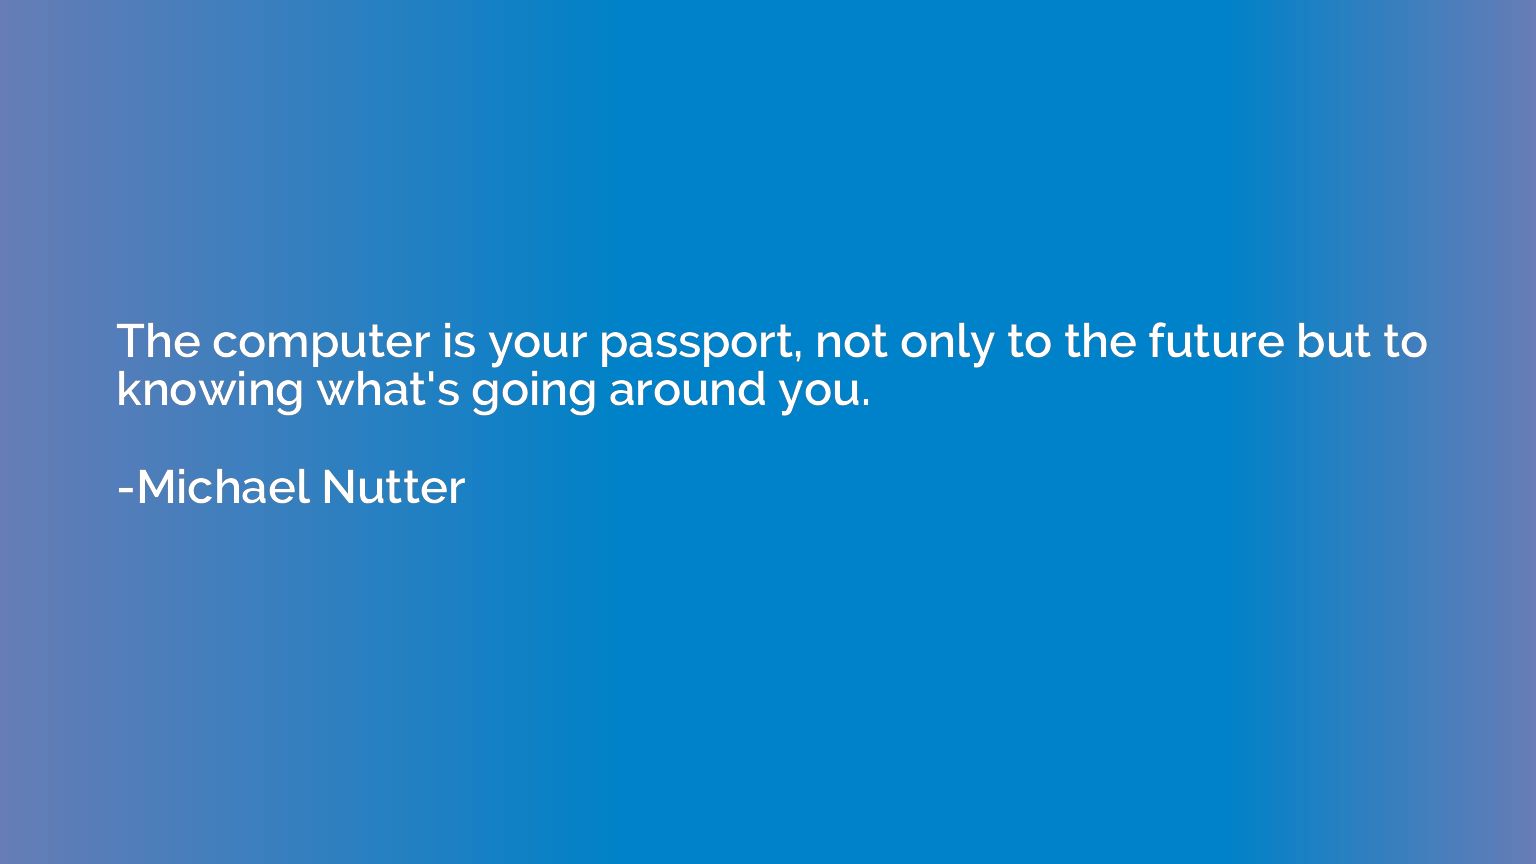 The computer is your passport, not only to the future but to